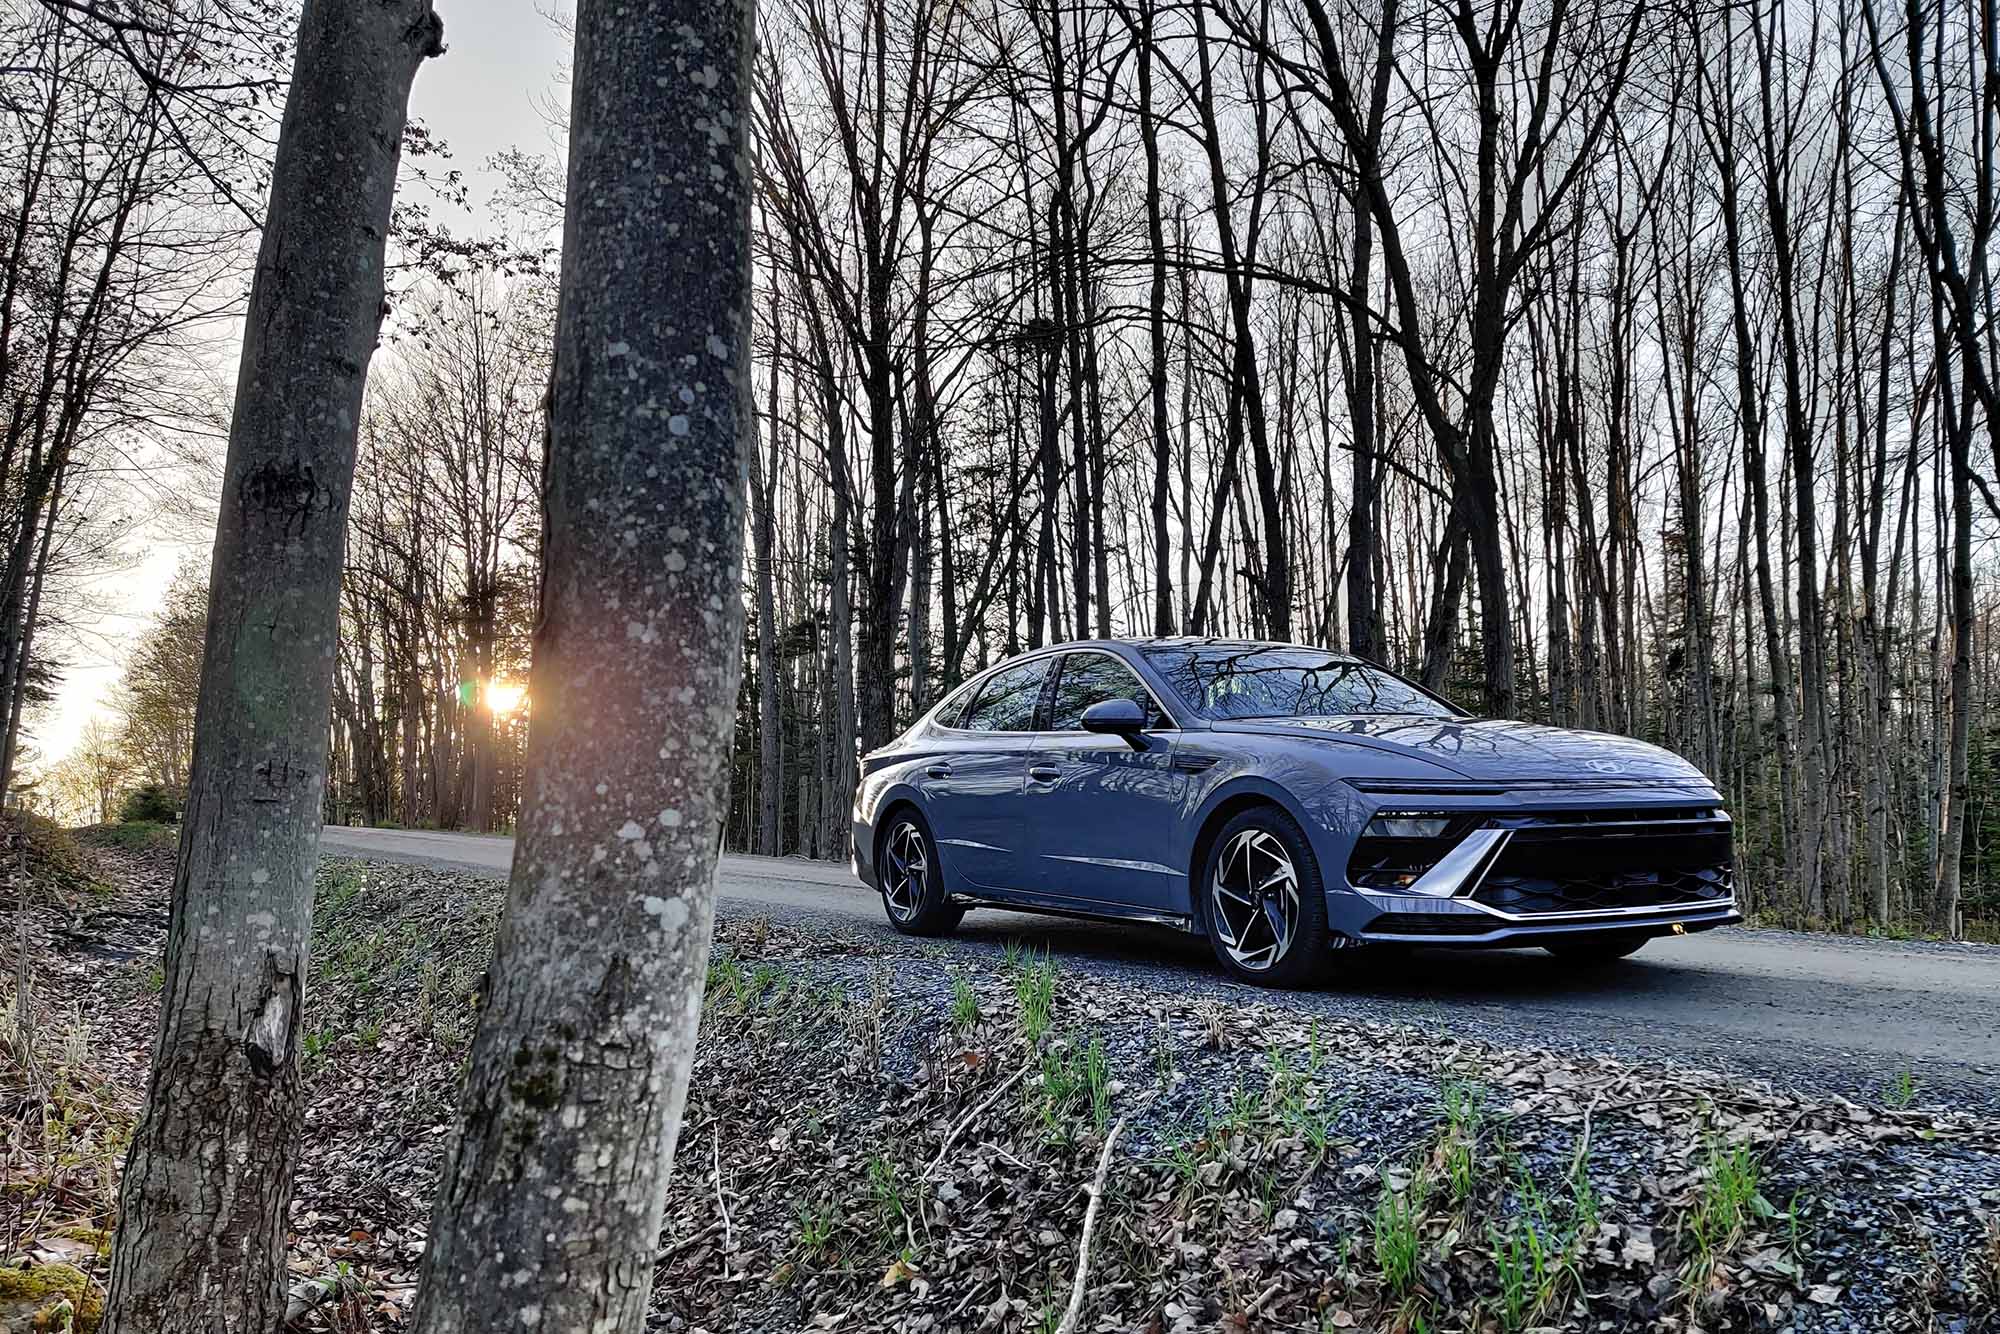 Front-quarter view of a Transmission Blue 2024 Hyundai SEL parked on gravel in the woods at sunset.